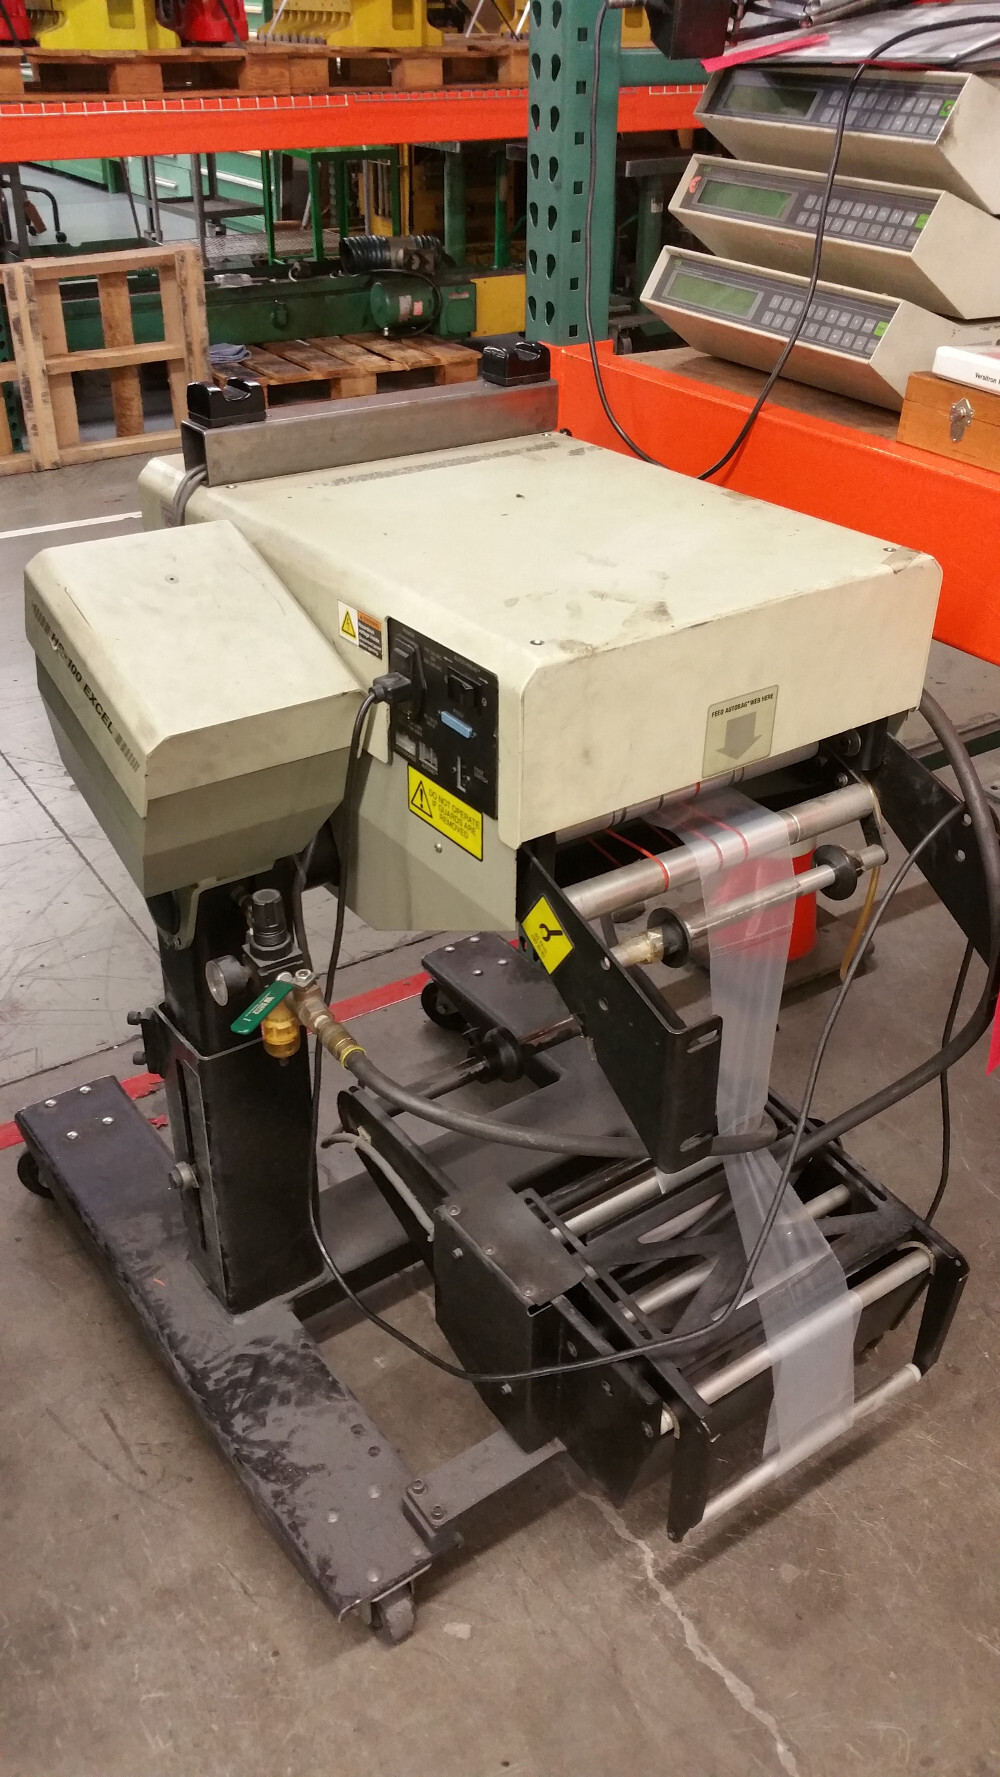 AUTOMATED PACKAGING SYSTEMS HS-100 EXCEL Sold Equipment | MD Equipment Services LLC